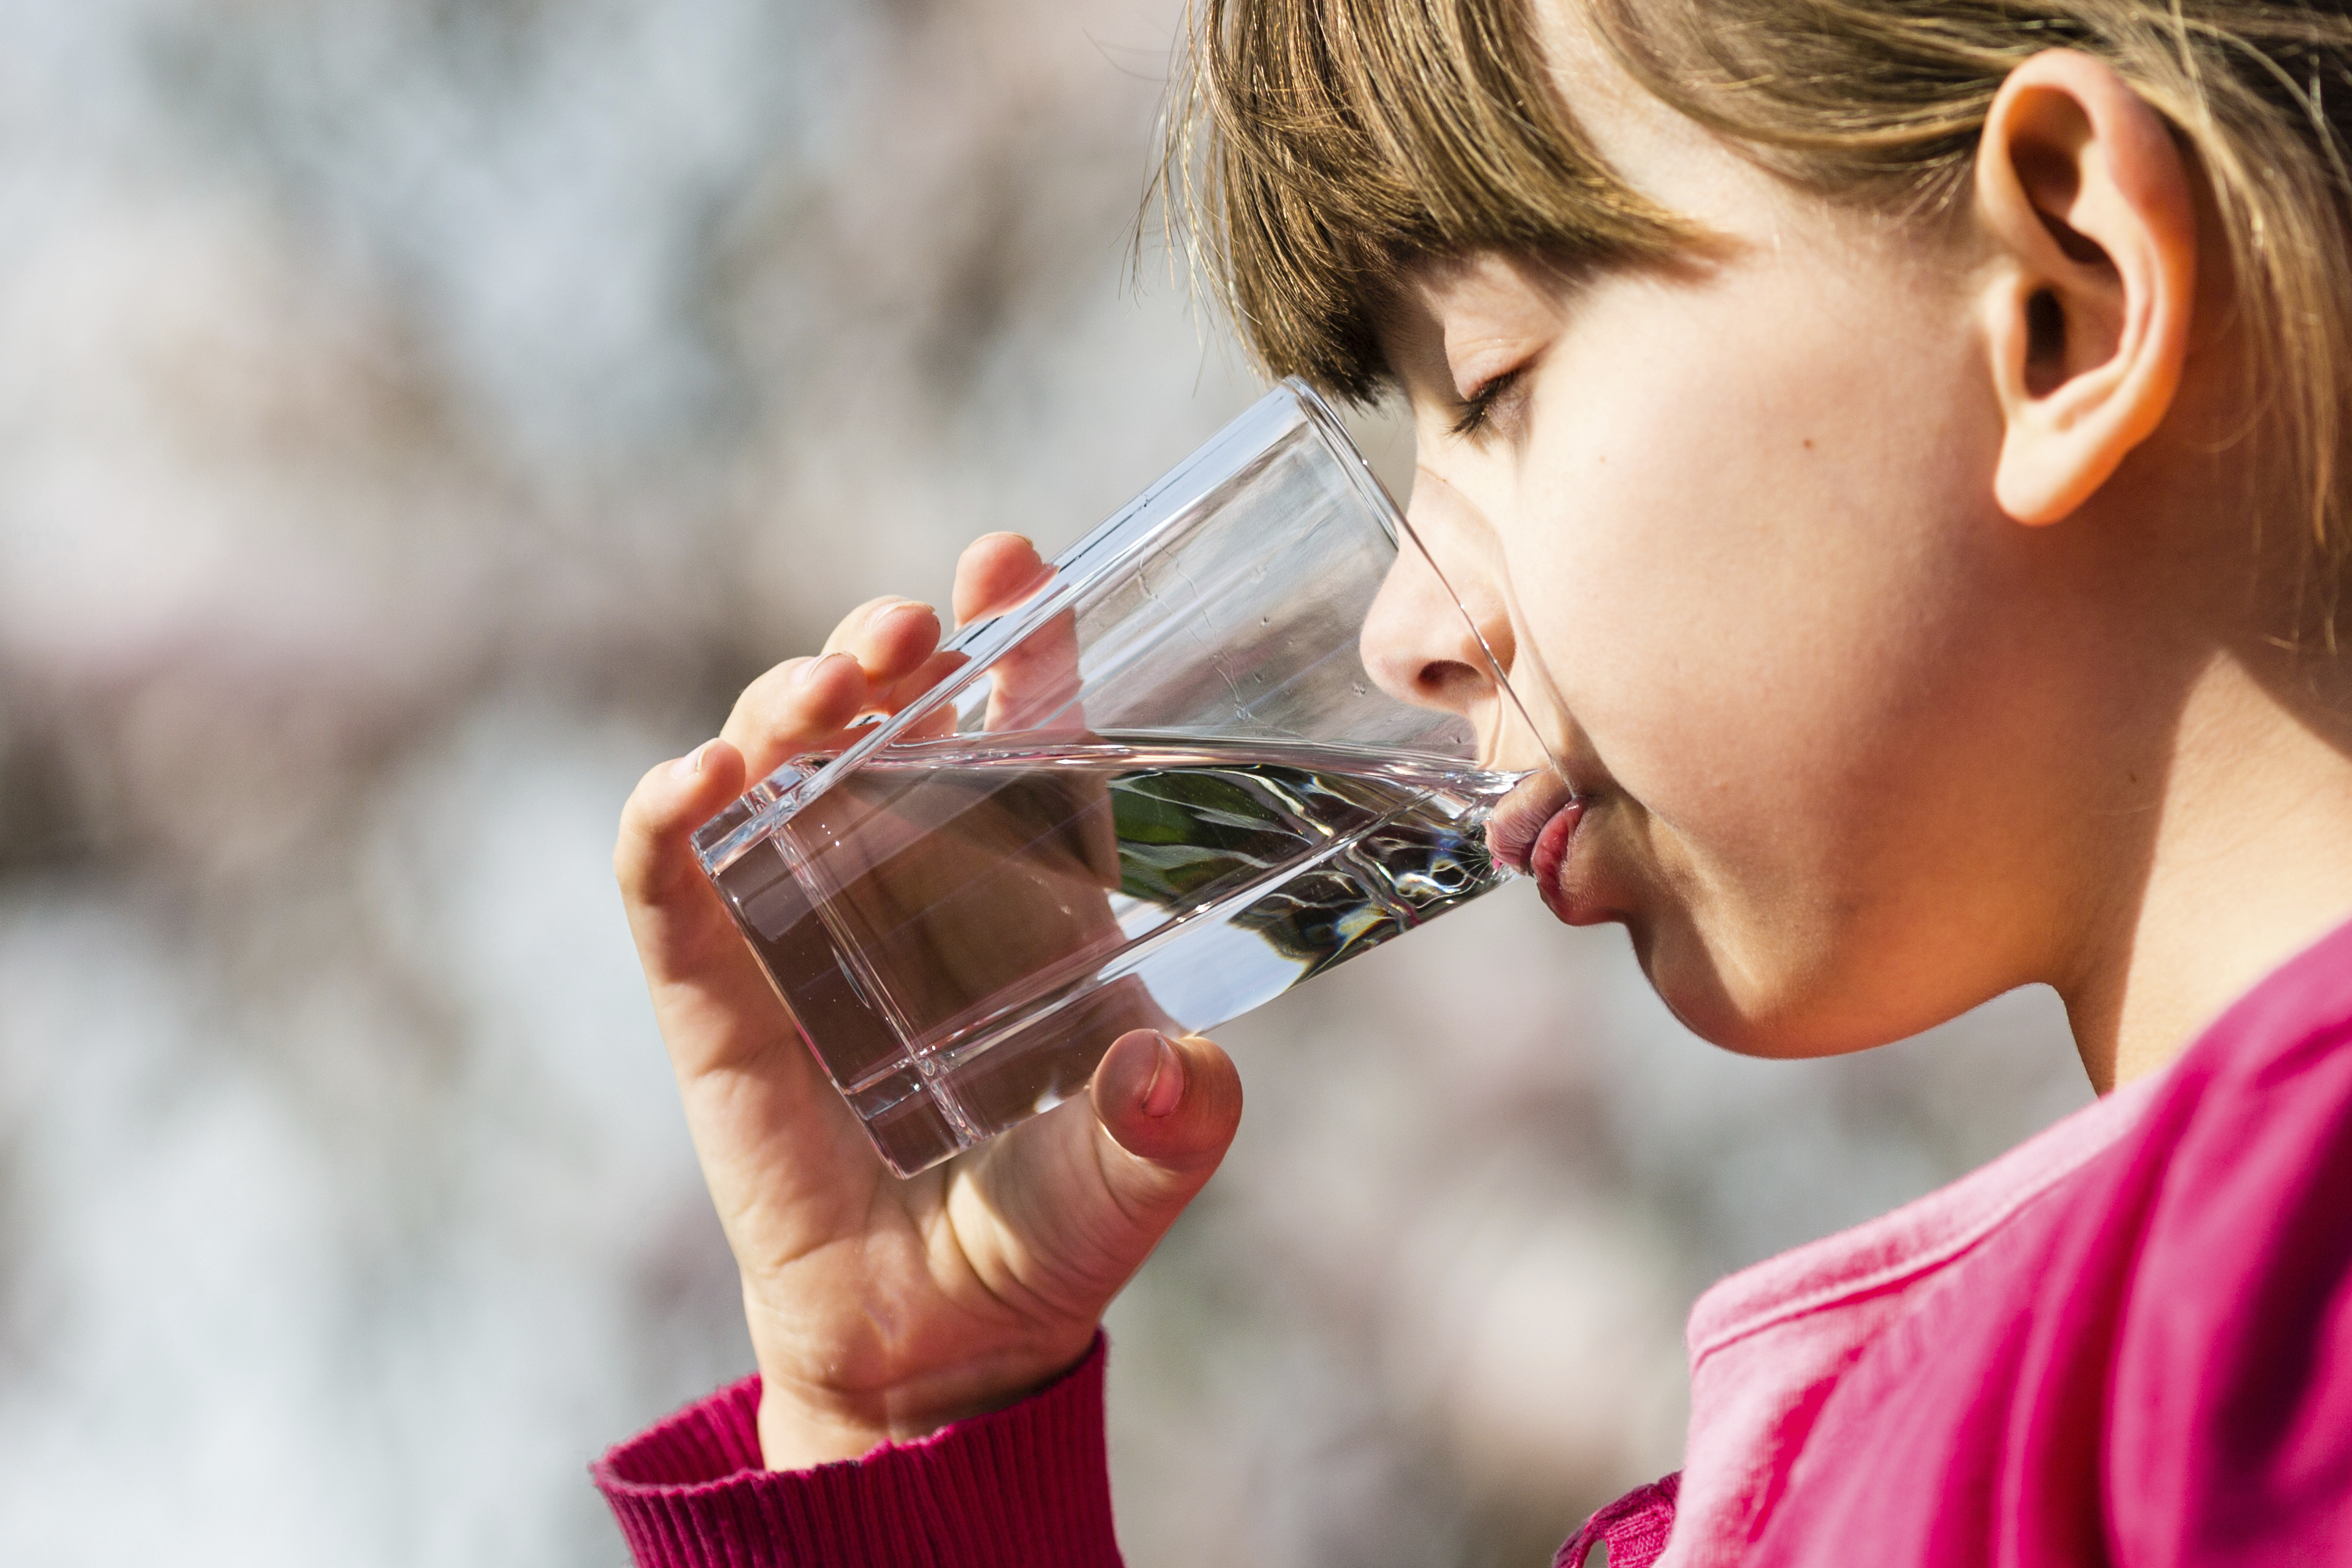 Girl drinking water from glass. Photo:  Bigandt_Photography / istock